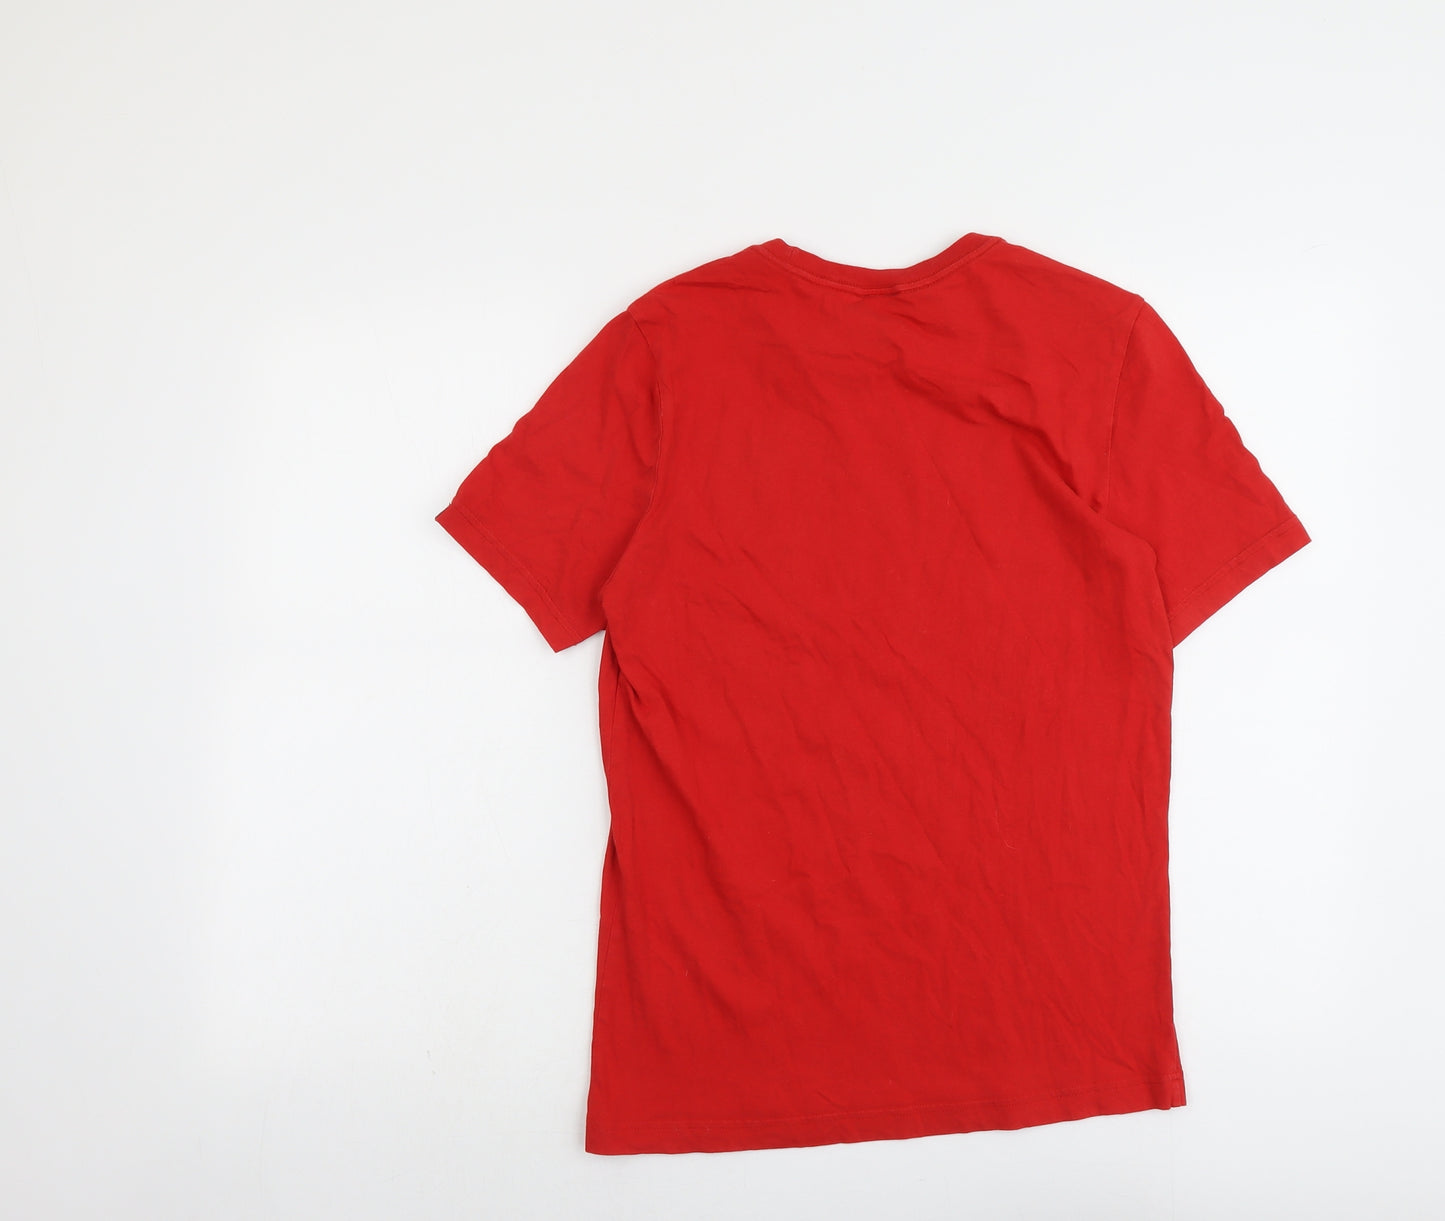 adidas Boys Red Cotton Basic T-Shirt Size 13-14 Years Round Neck Pullover